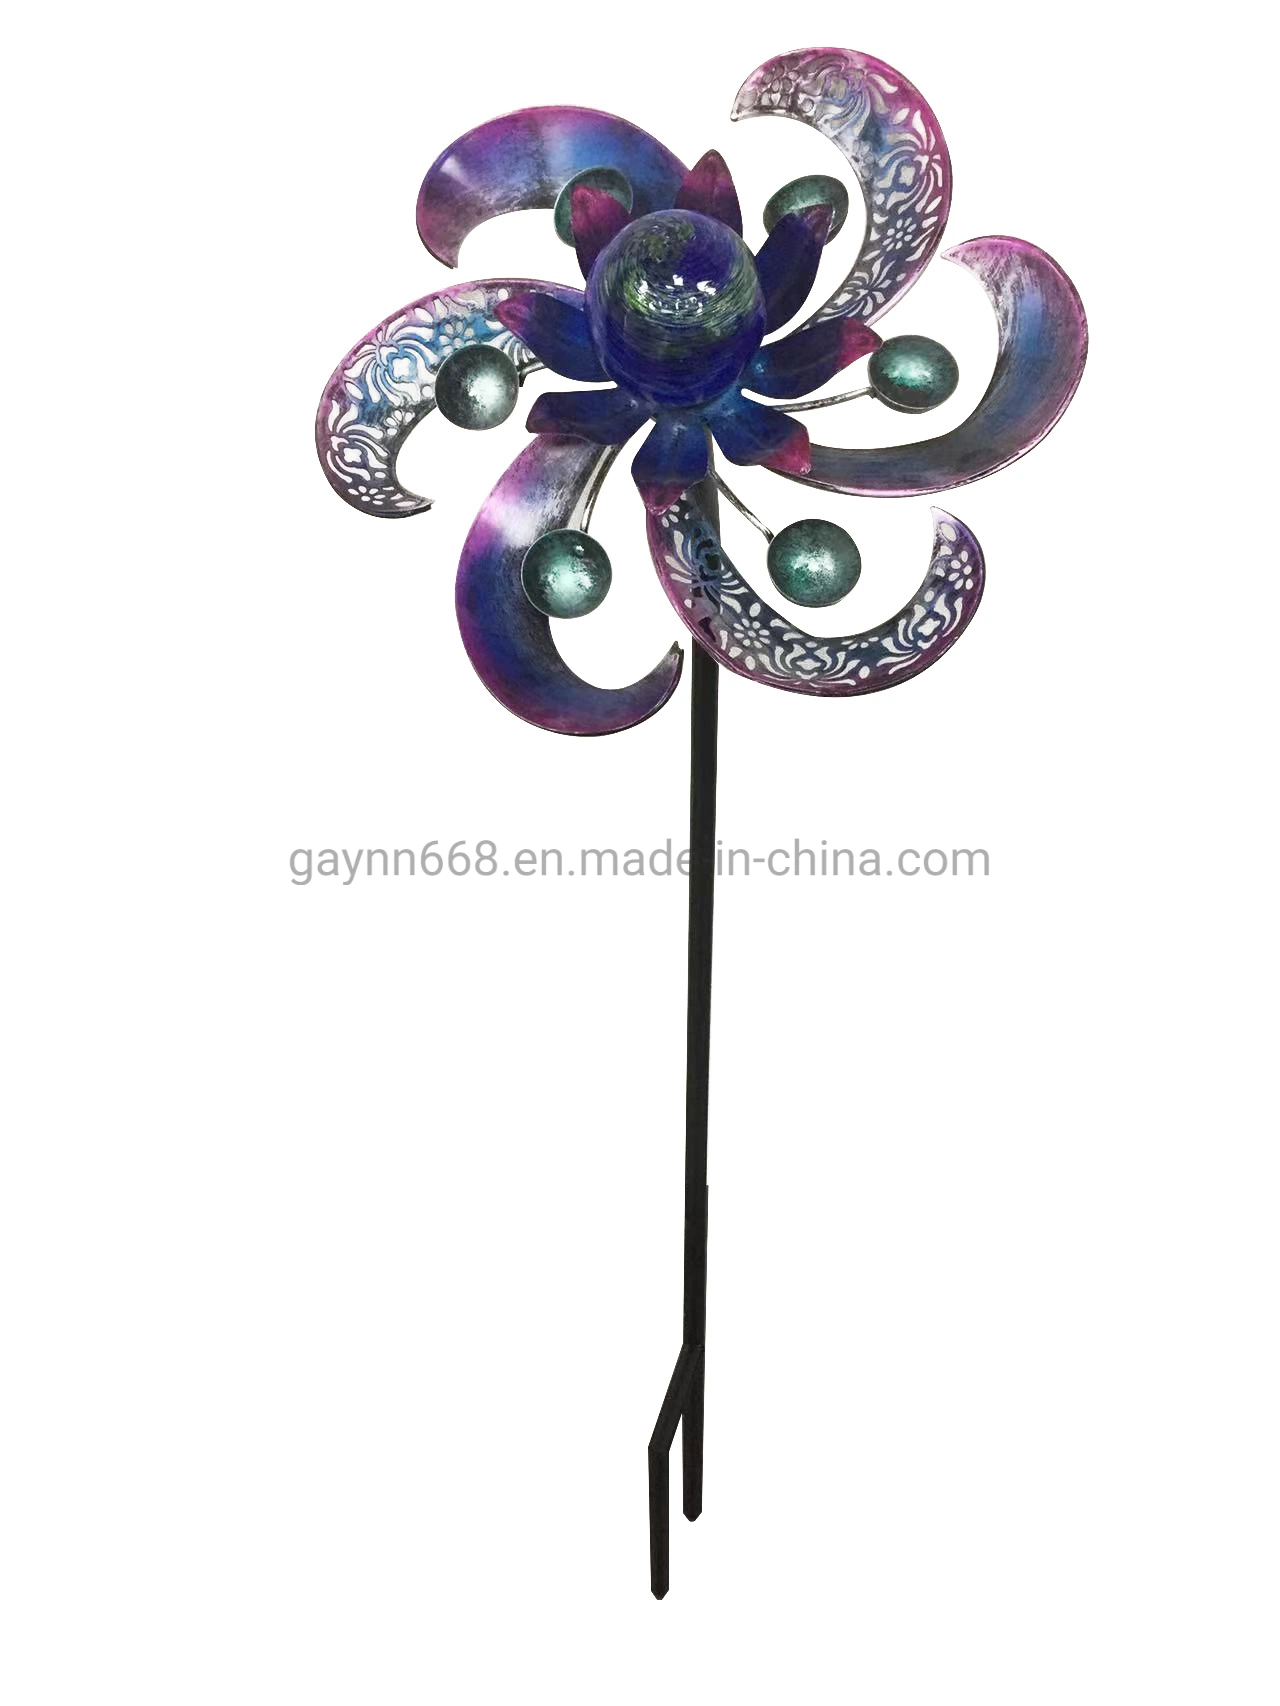 Solar Multi-Color Metal Wind Spinner with Flower Design for Garden Decoration &Patio, Lawn Decor